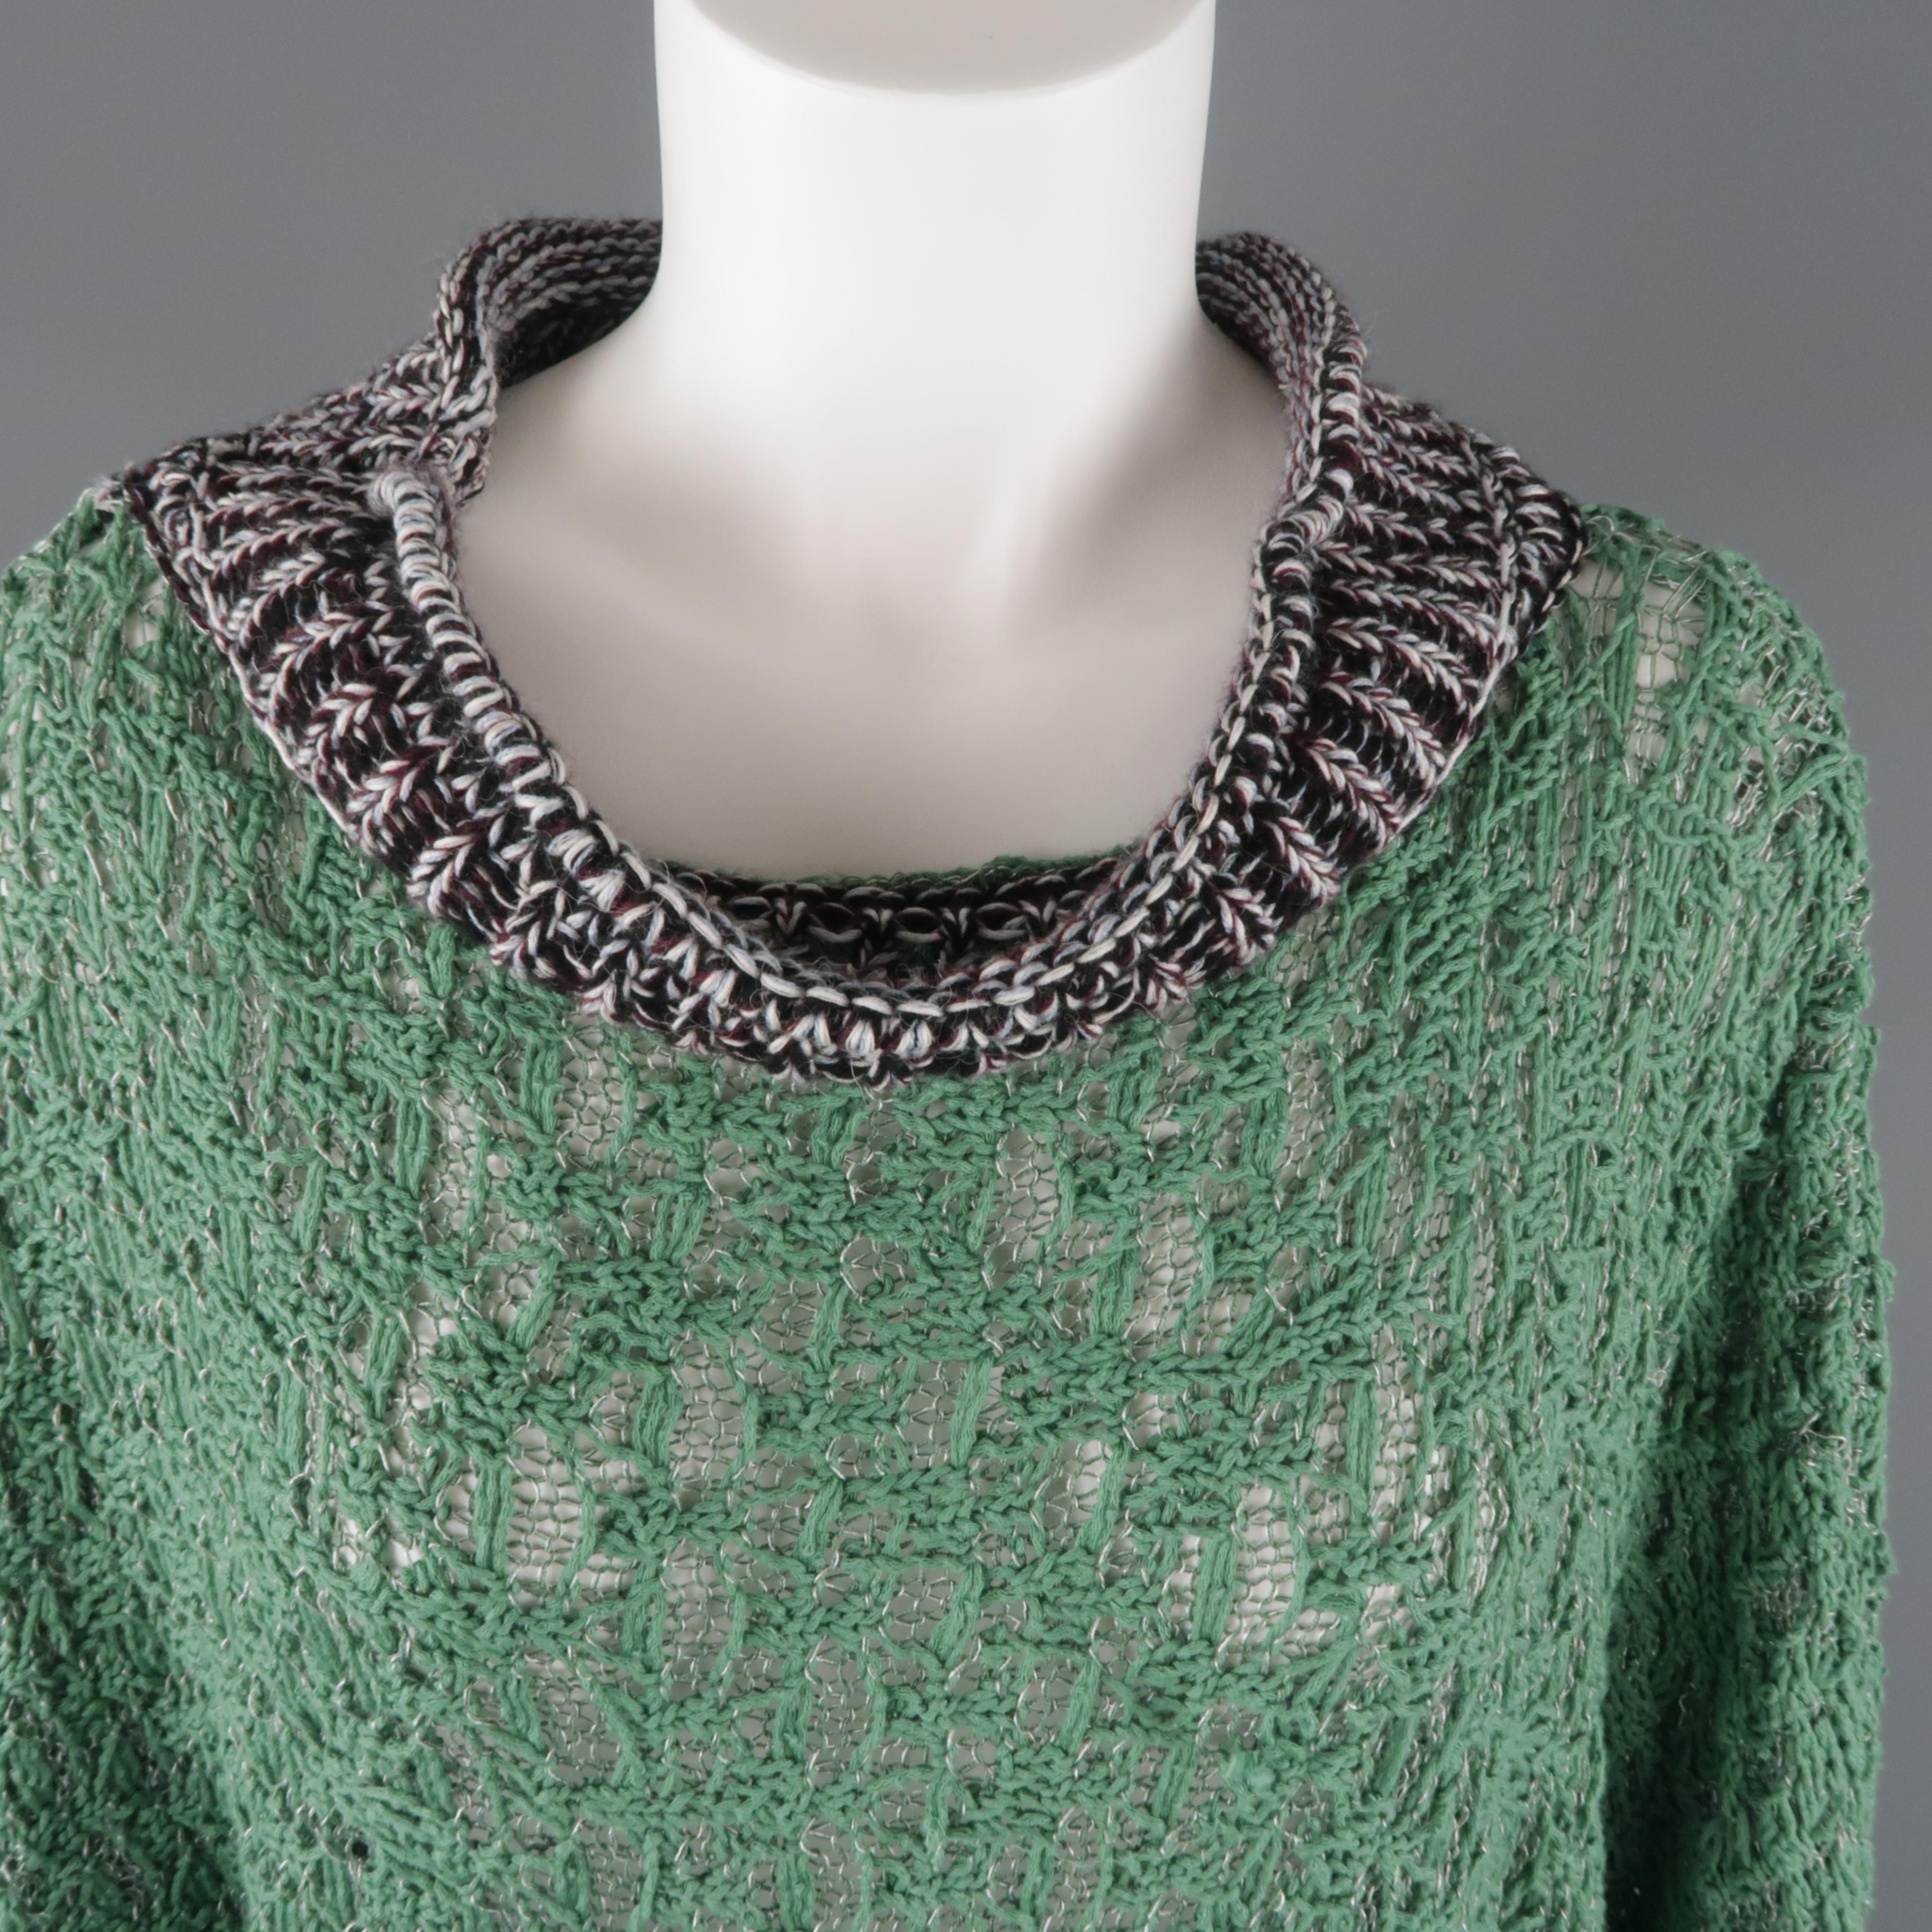 AF VANDERFROST pullover sweater comes in a green mesh knit with batwing sleeves and black, white , and burgundy textured knit trims. No tag. Made in Belgium.
 
Good Pre-Owned Condition.
Marked: S
 
Measurements:
 
Shoulder: 22 in.
Bust: 60